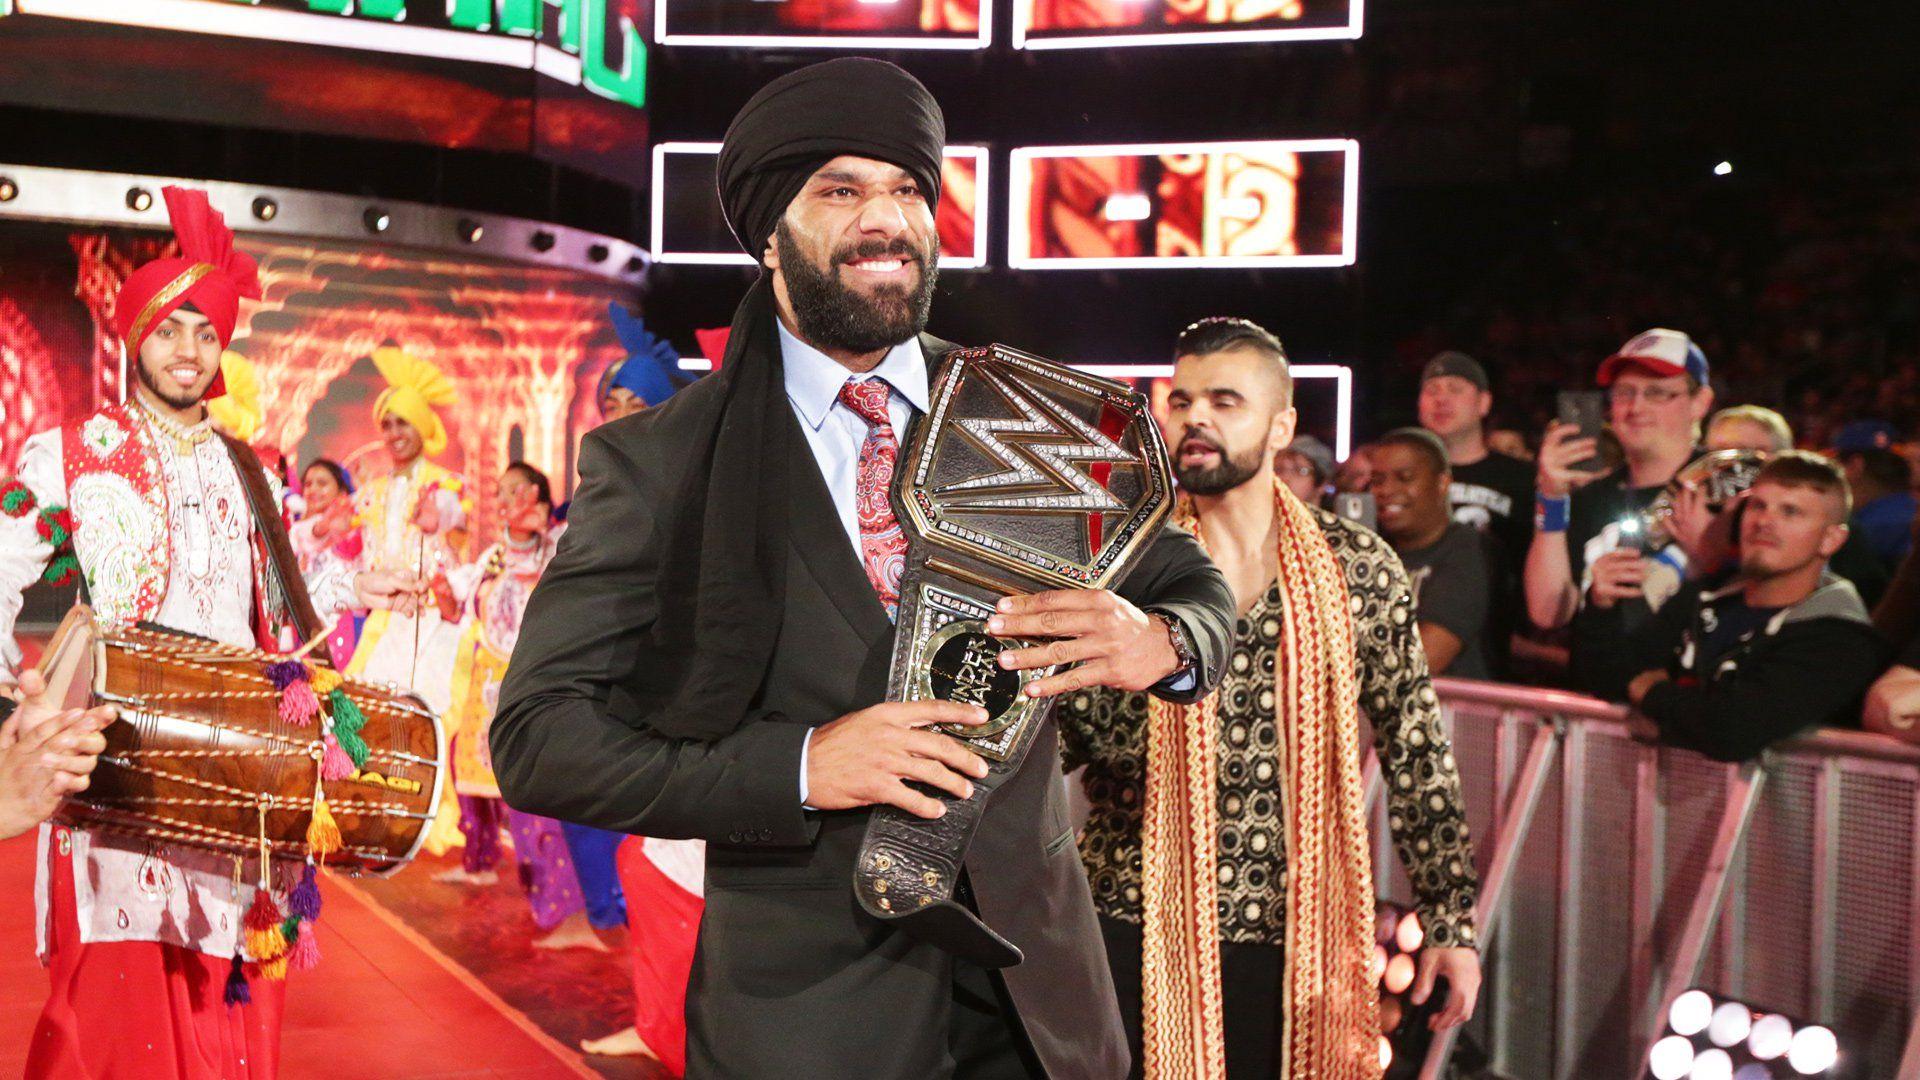 Jinder Mahal's WWE Championship Reign Expected To End Soon?